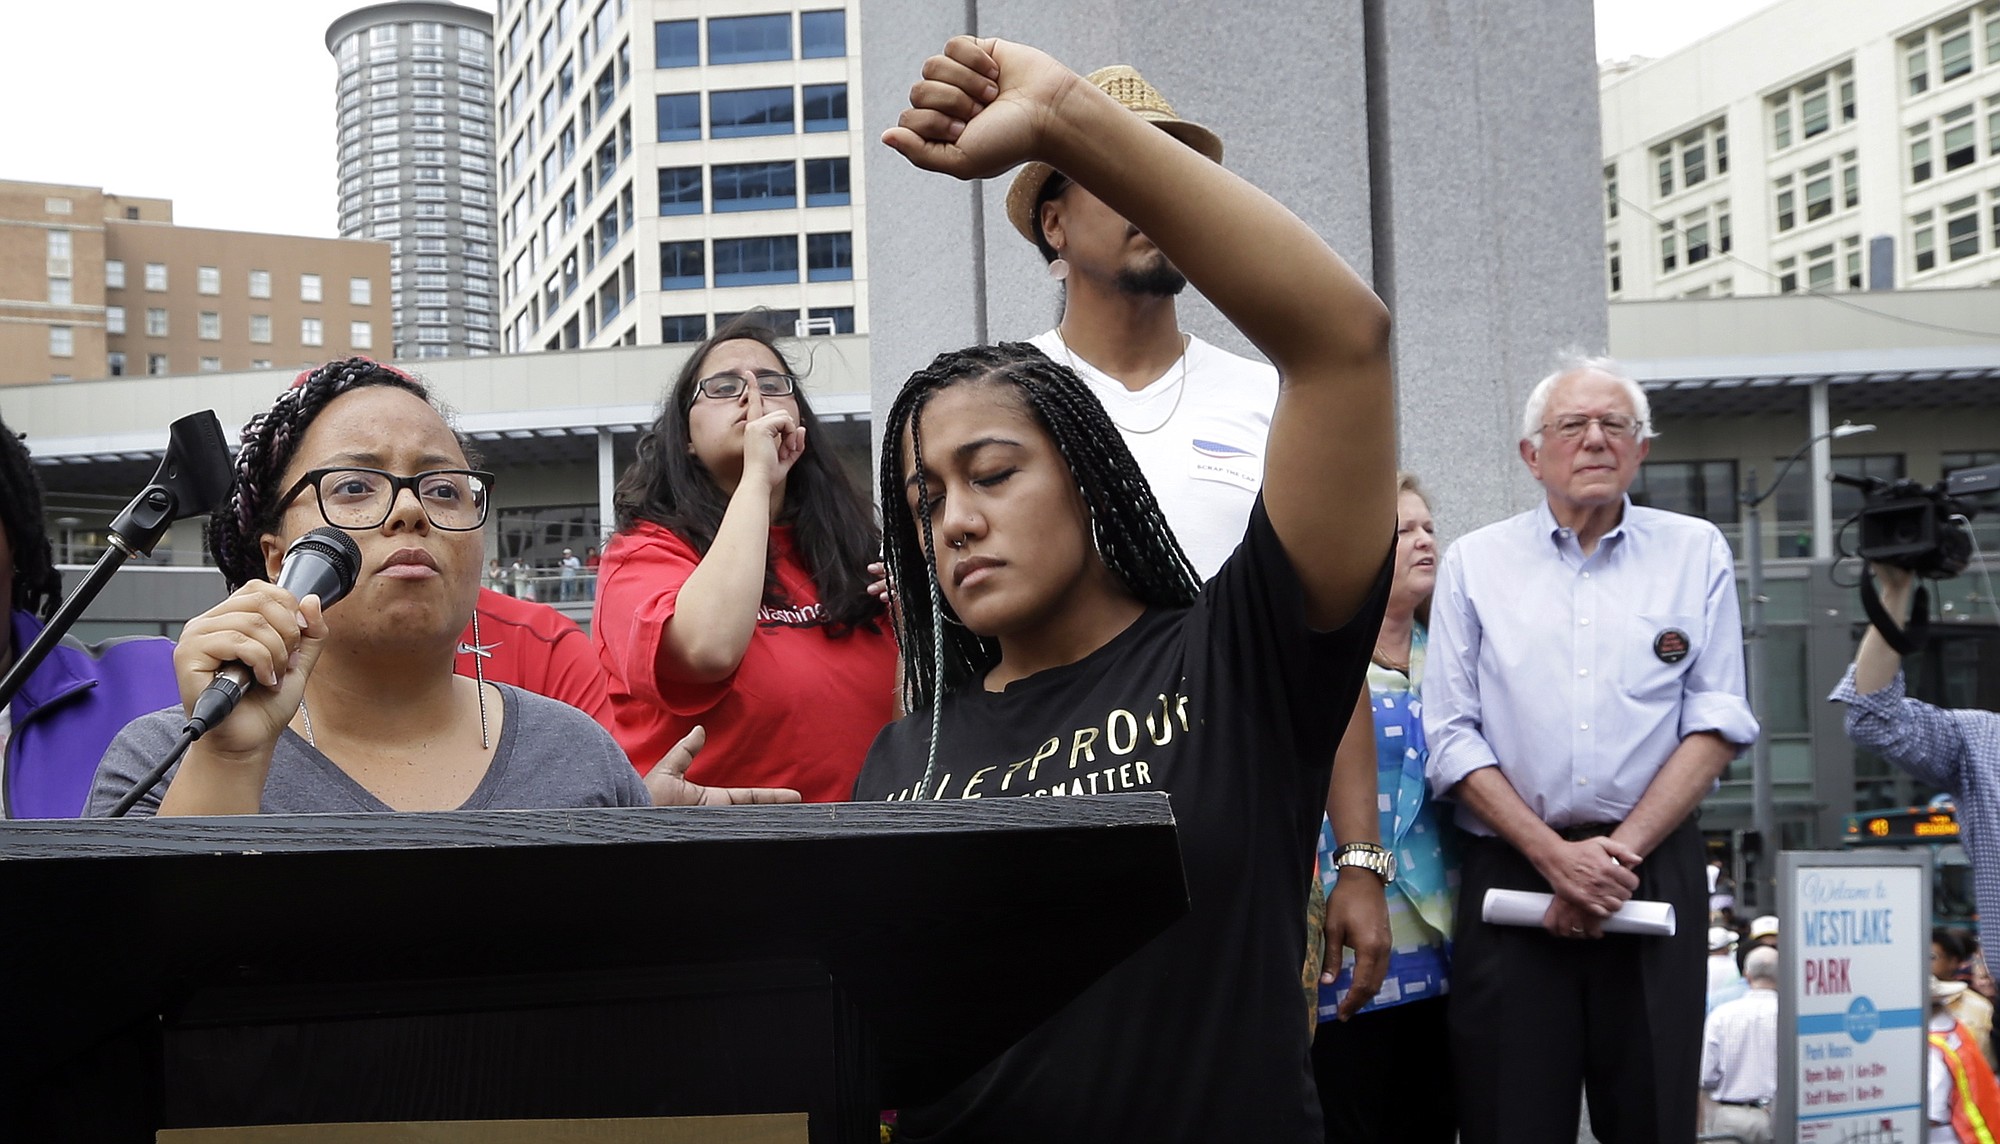 Marissa Johnson, left, speaks as Mara Jacqueline Willaford holds her fist overhead and Democratic presidential candidate Sen. Bernie Sanders, I-Vt., stands nearby as the two women take over the microphone at a rally Saturday in downtown Seattle. The women, co-founders of the Seattle chapter of Black Lives Matter, took over the microphone and refused to relinquish it.